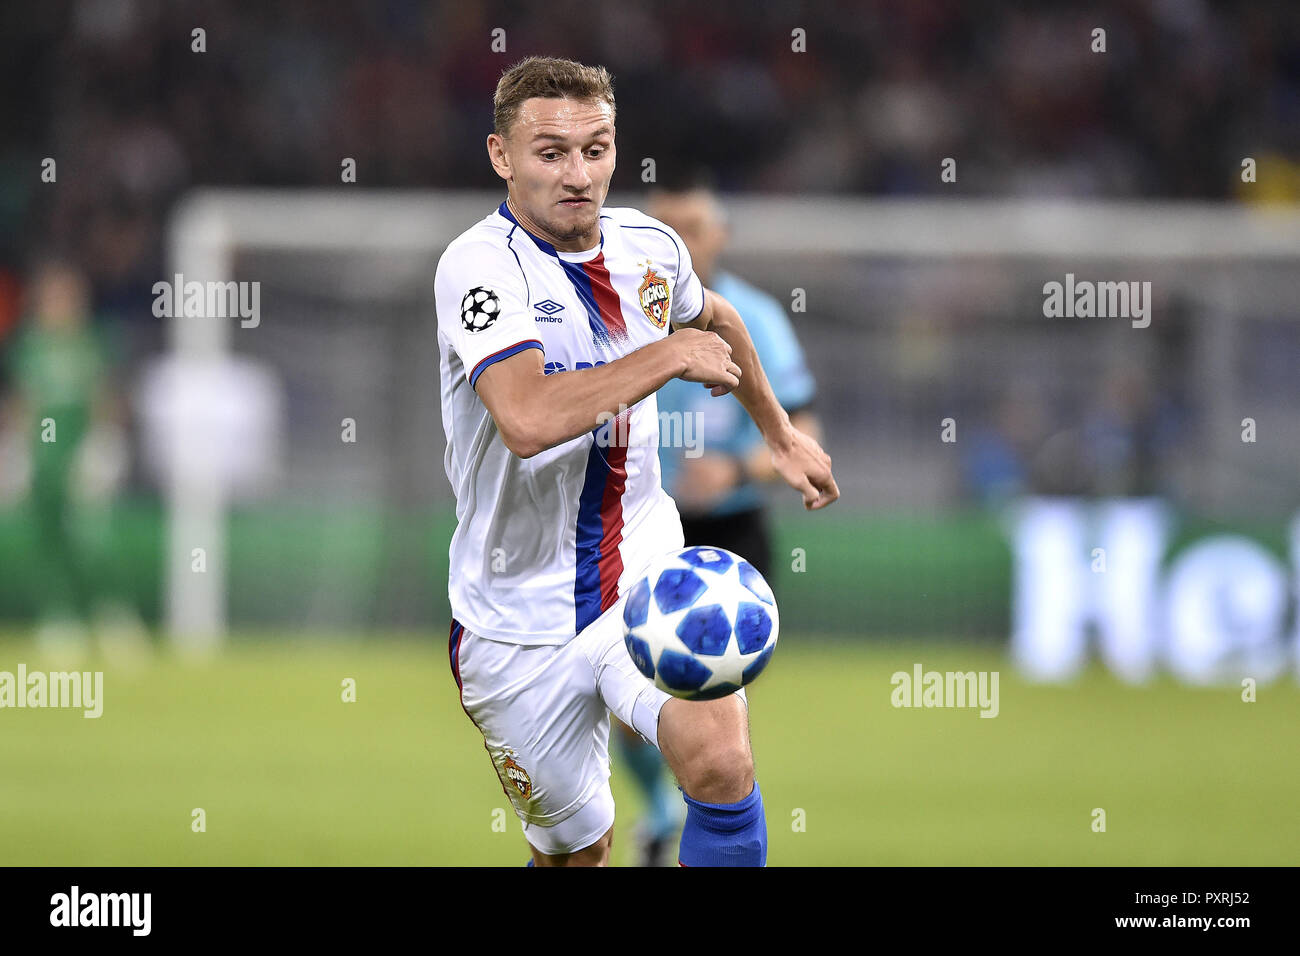 Rome, Italy. 23rd Oct 2018. Fyodor Chalov of CSKA Moscow during the UEFA Champions League group stage match between Roma and CSKA Moscow at Stadio Olimpico, Rome, Italy on 23 October 2018. Photo by Giuseppe Maffia. Credit: UK Sports Pics Ltd/Alamy Live News Stock Photo